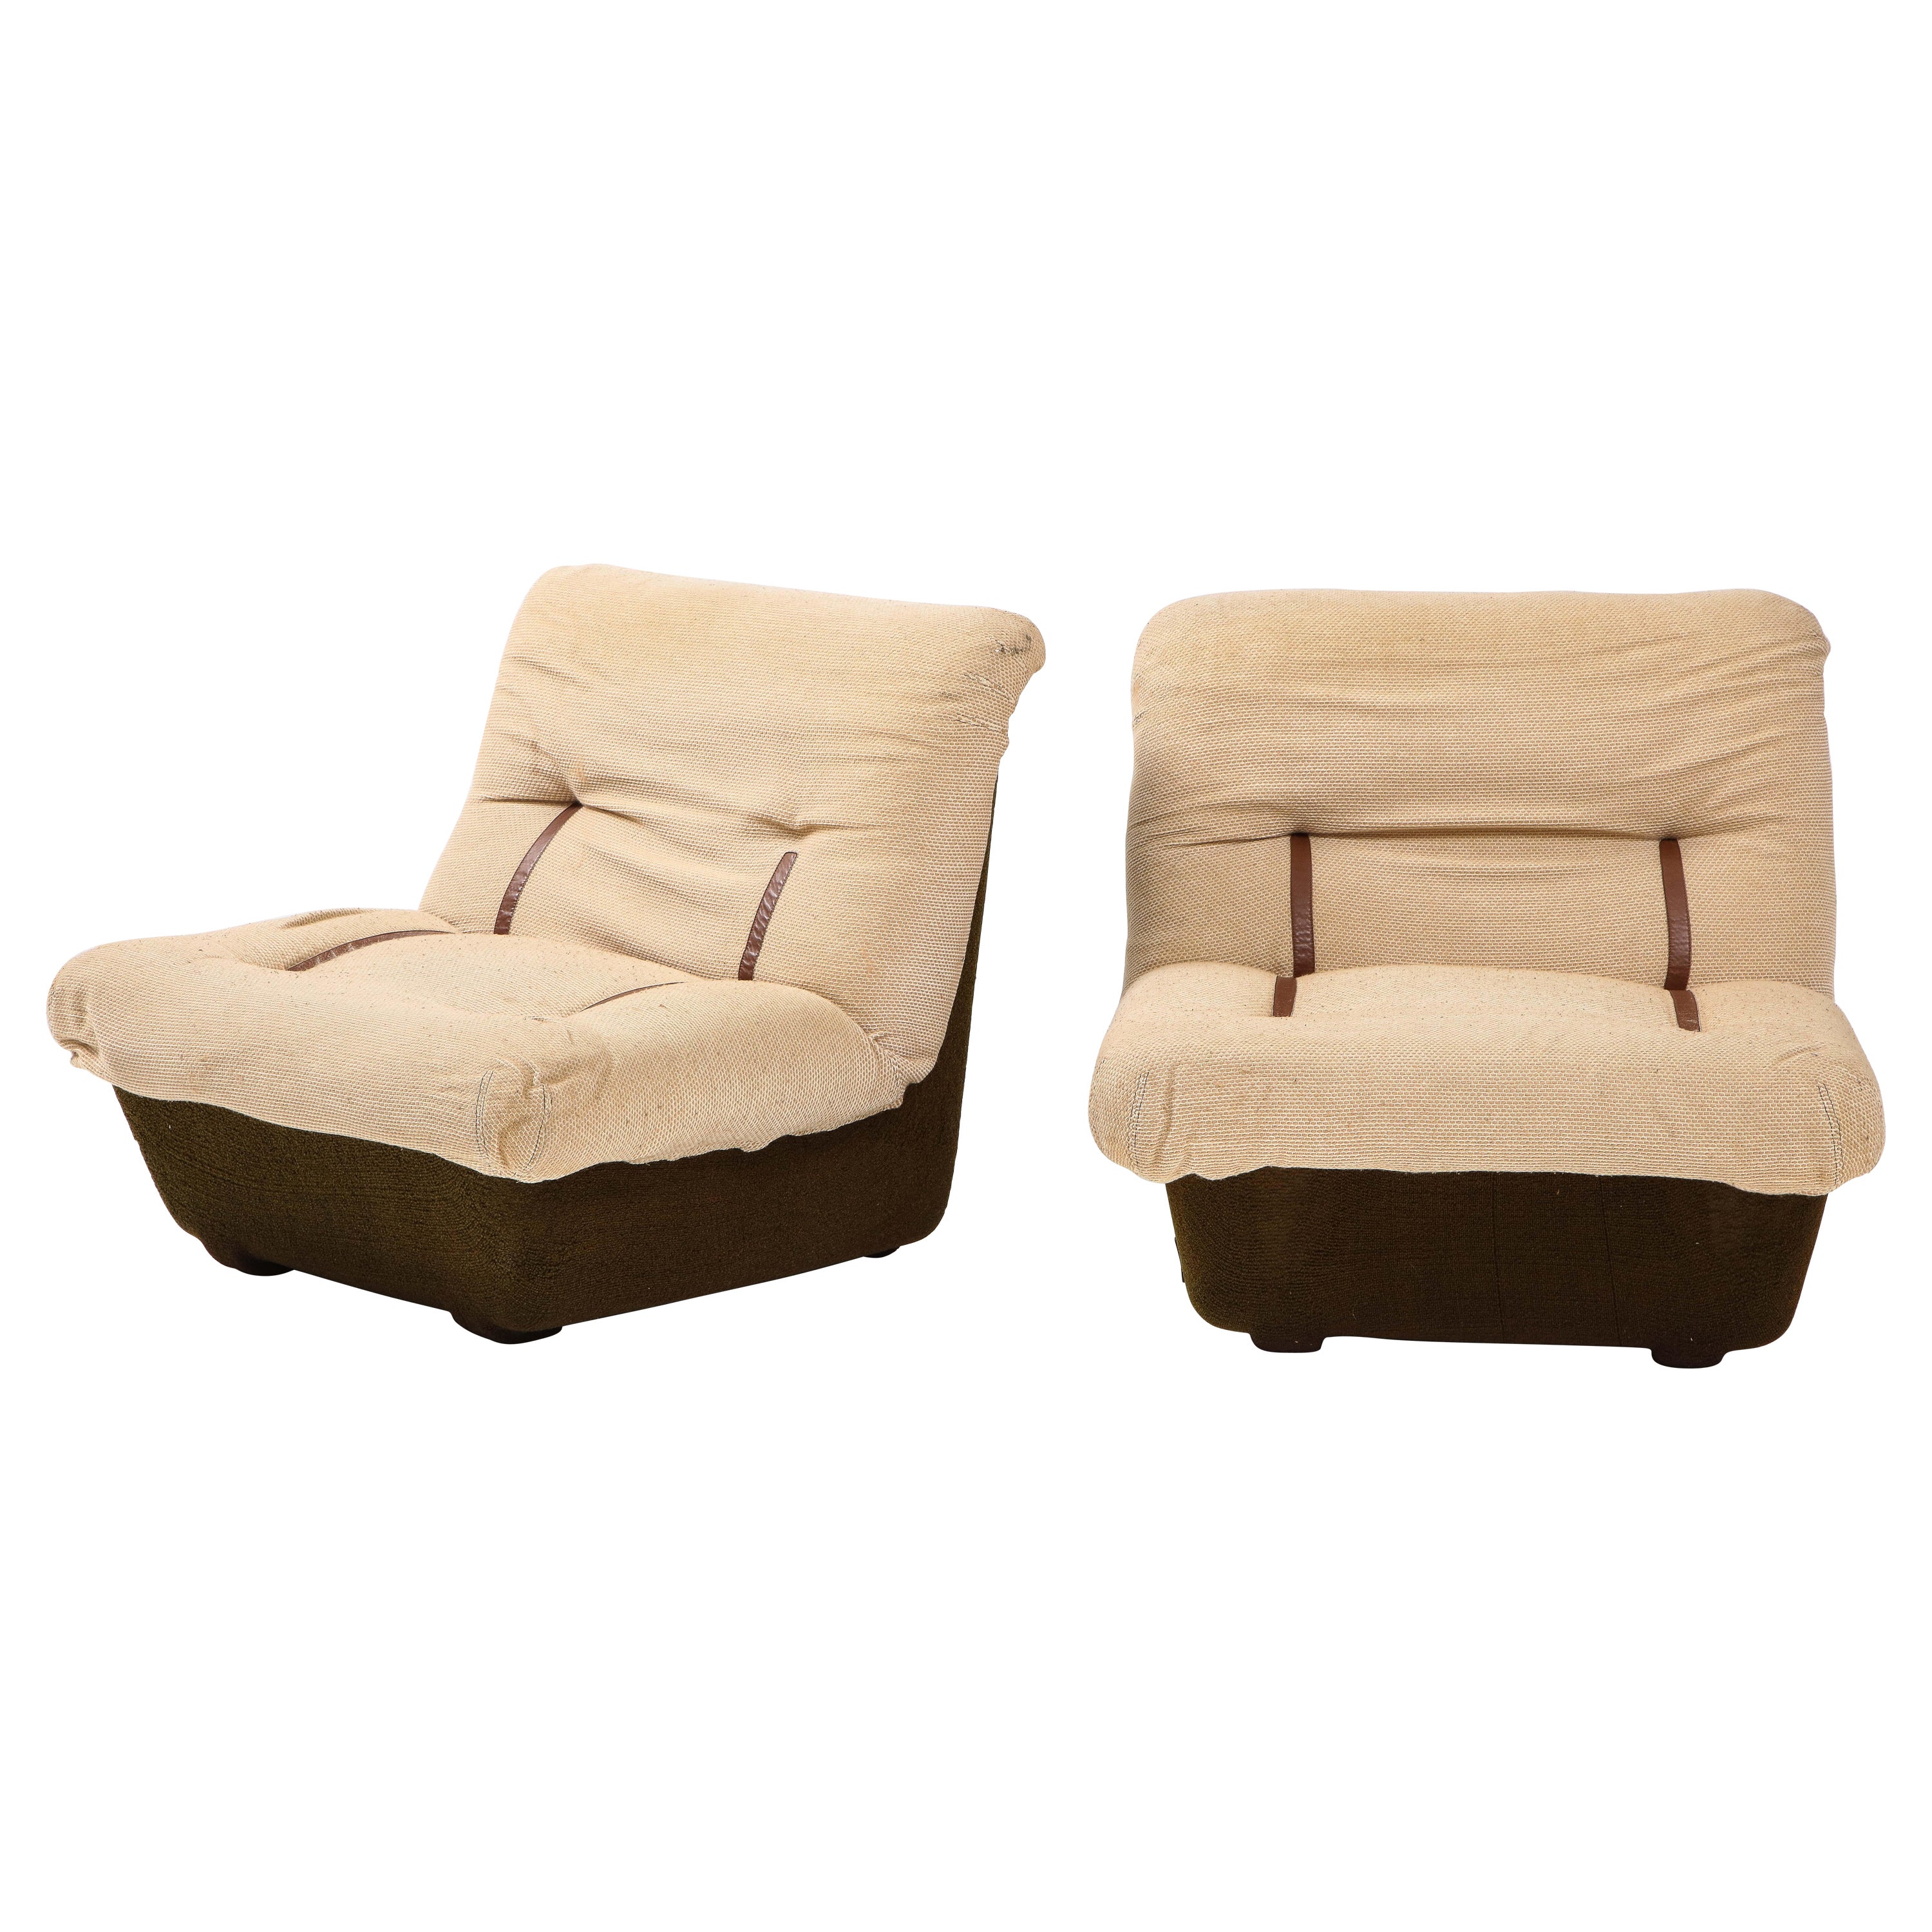 Pair of Italian 1970's Lounge Chairs by Lev & Lev